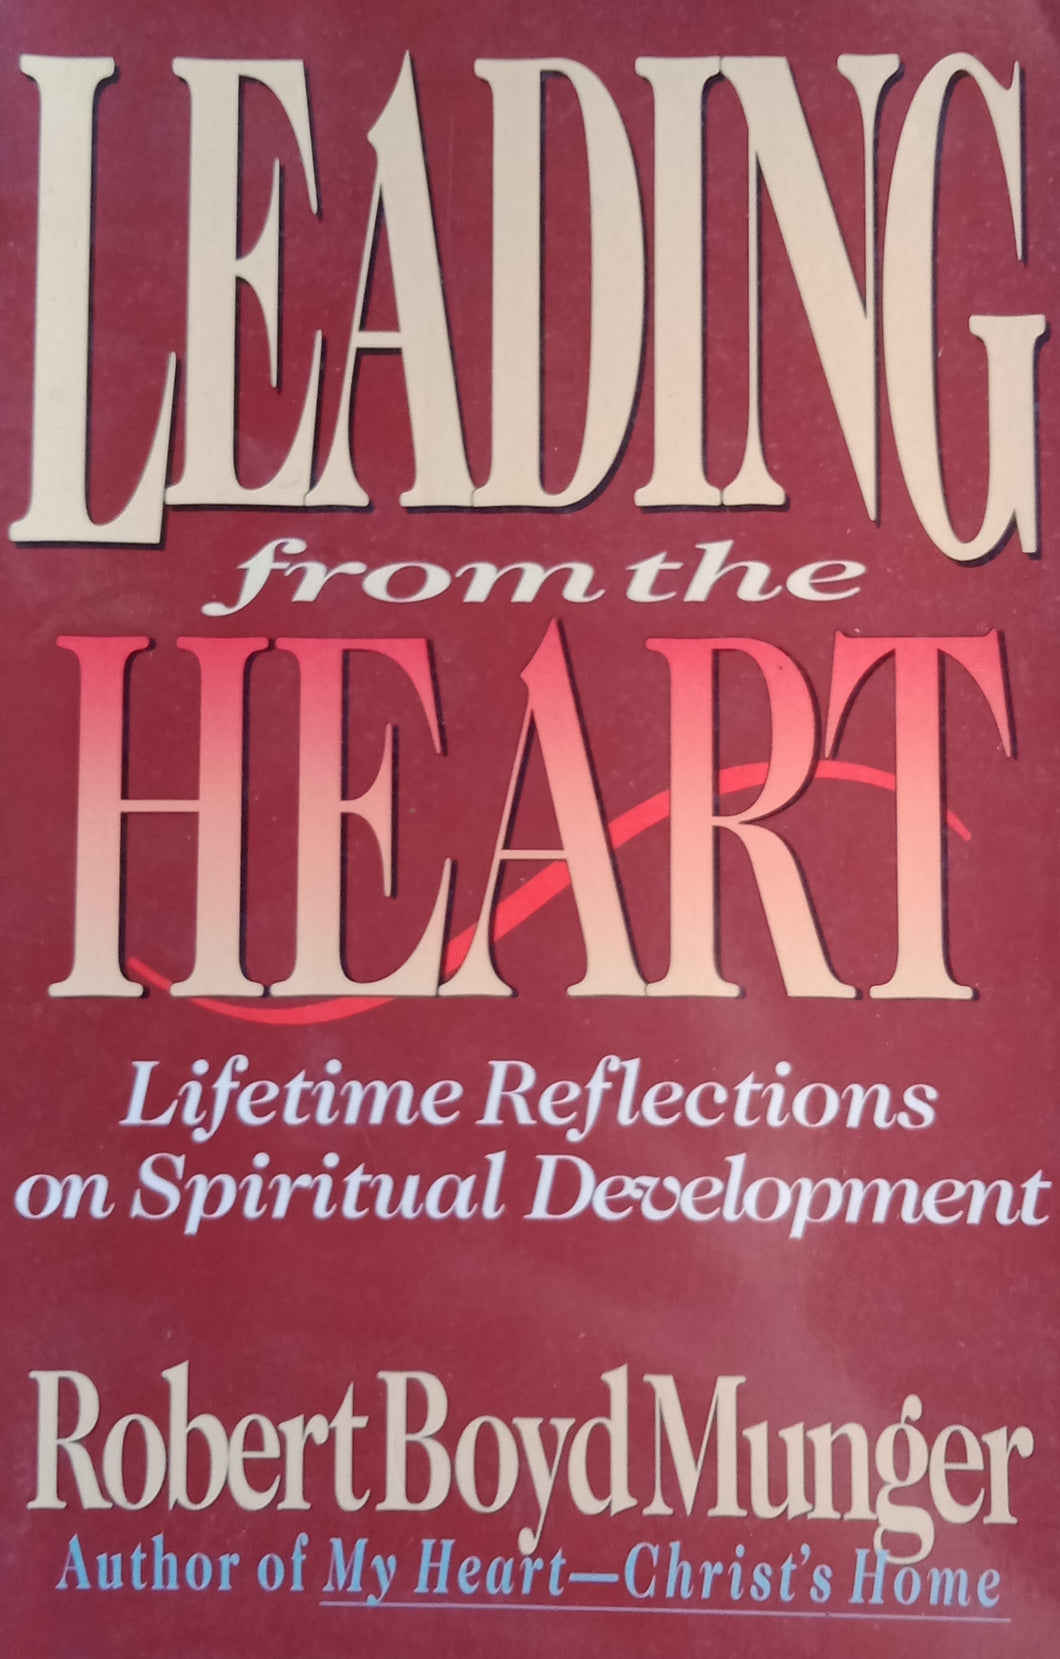 Leading From The Heart by Robert Boyd Munger